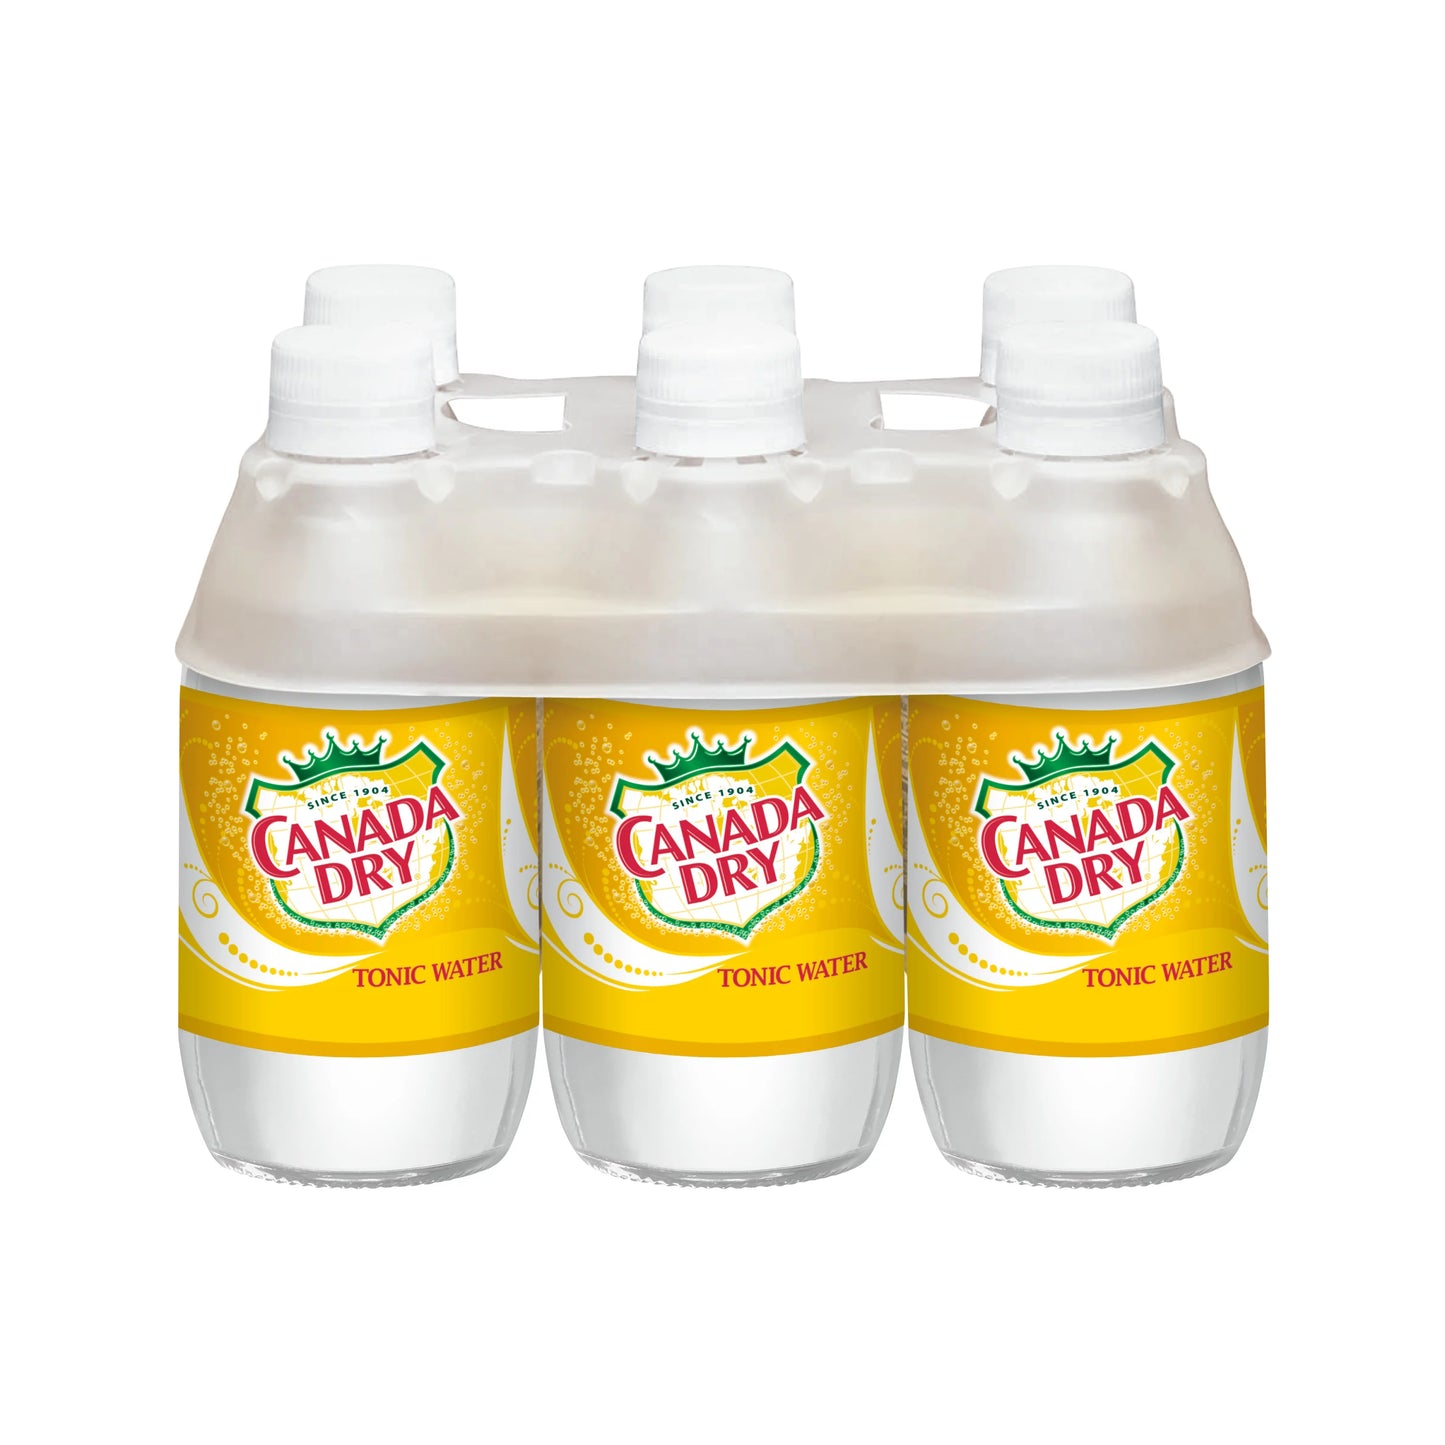 Canada Dry Tonic Water 10oz Glass Bottle 6 Pack or 20 Pack - drinkdrop.net